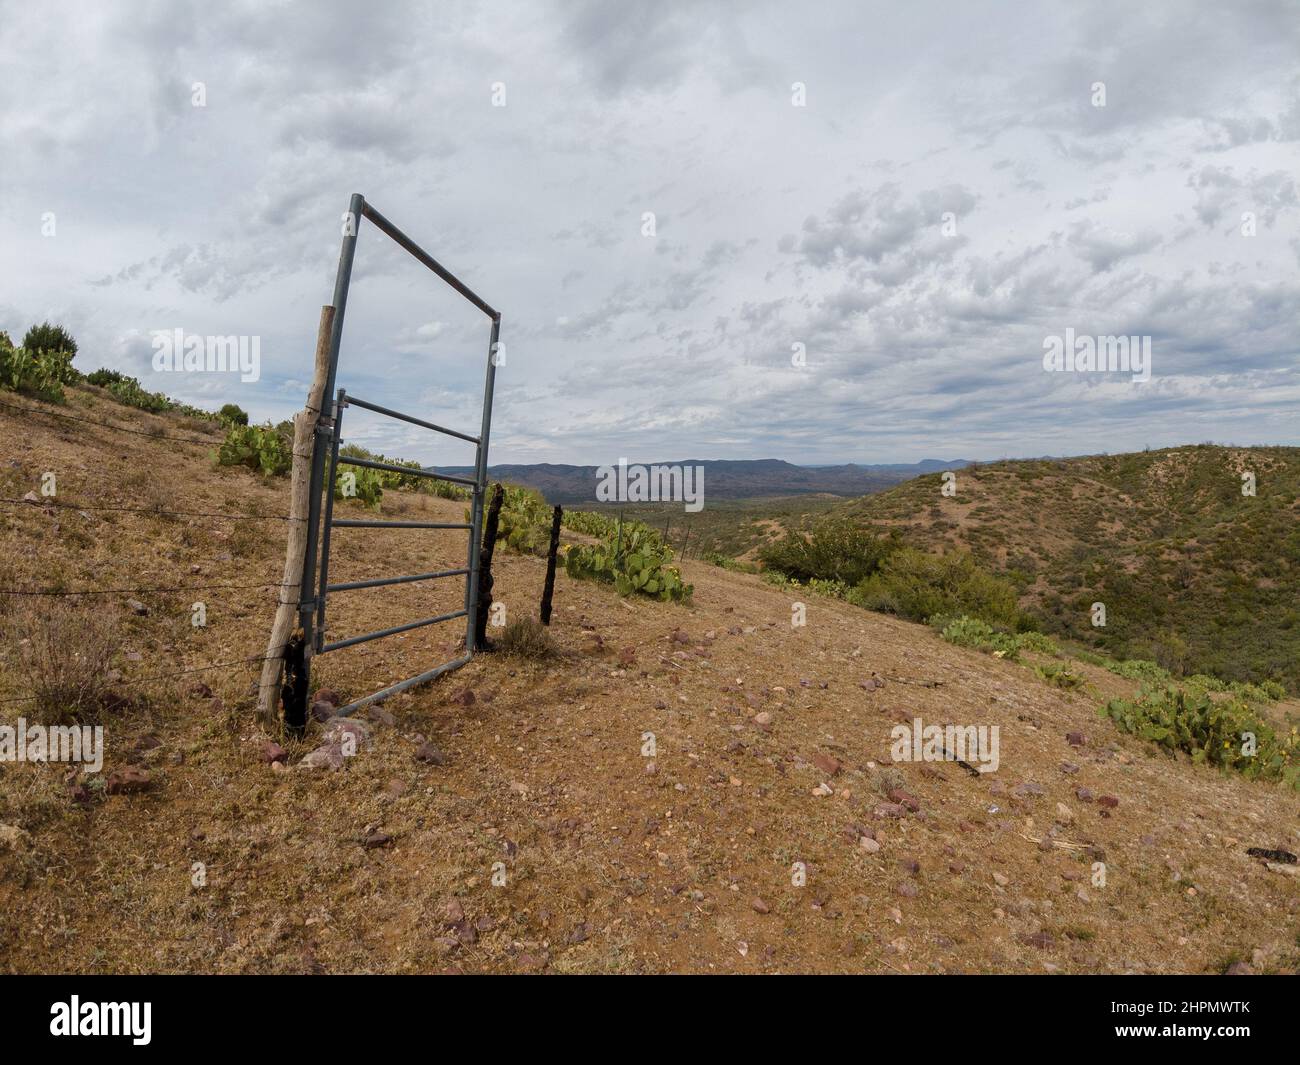 Old livestock gate with barb wire fence in a hilly, desert landscape on a cloudy day. Stock Photo